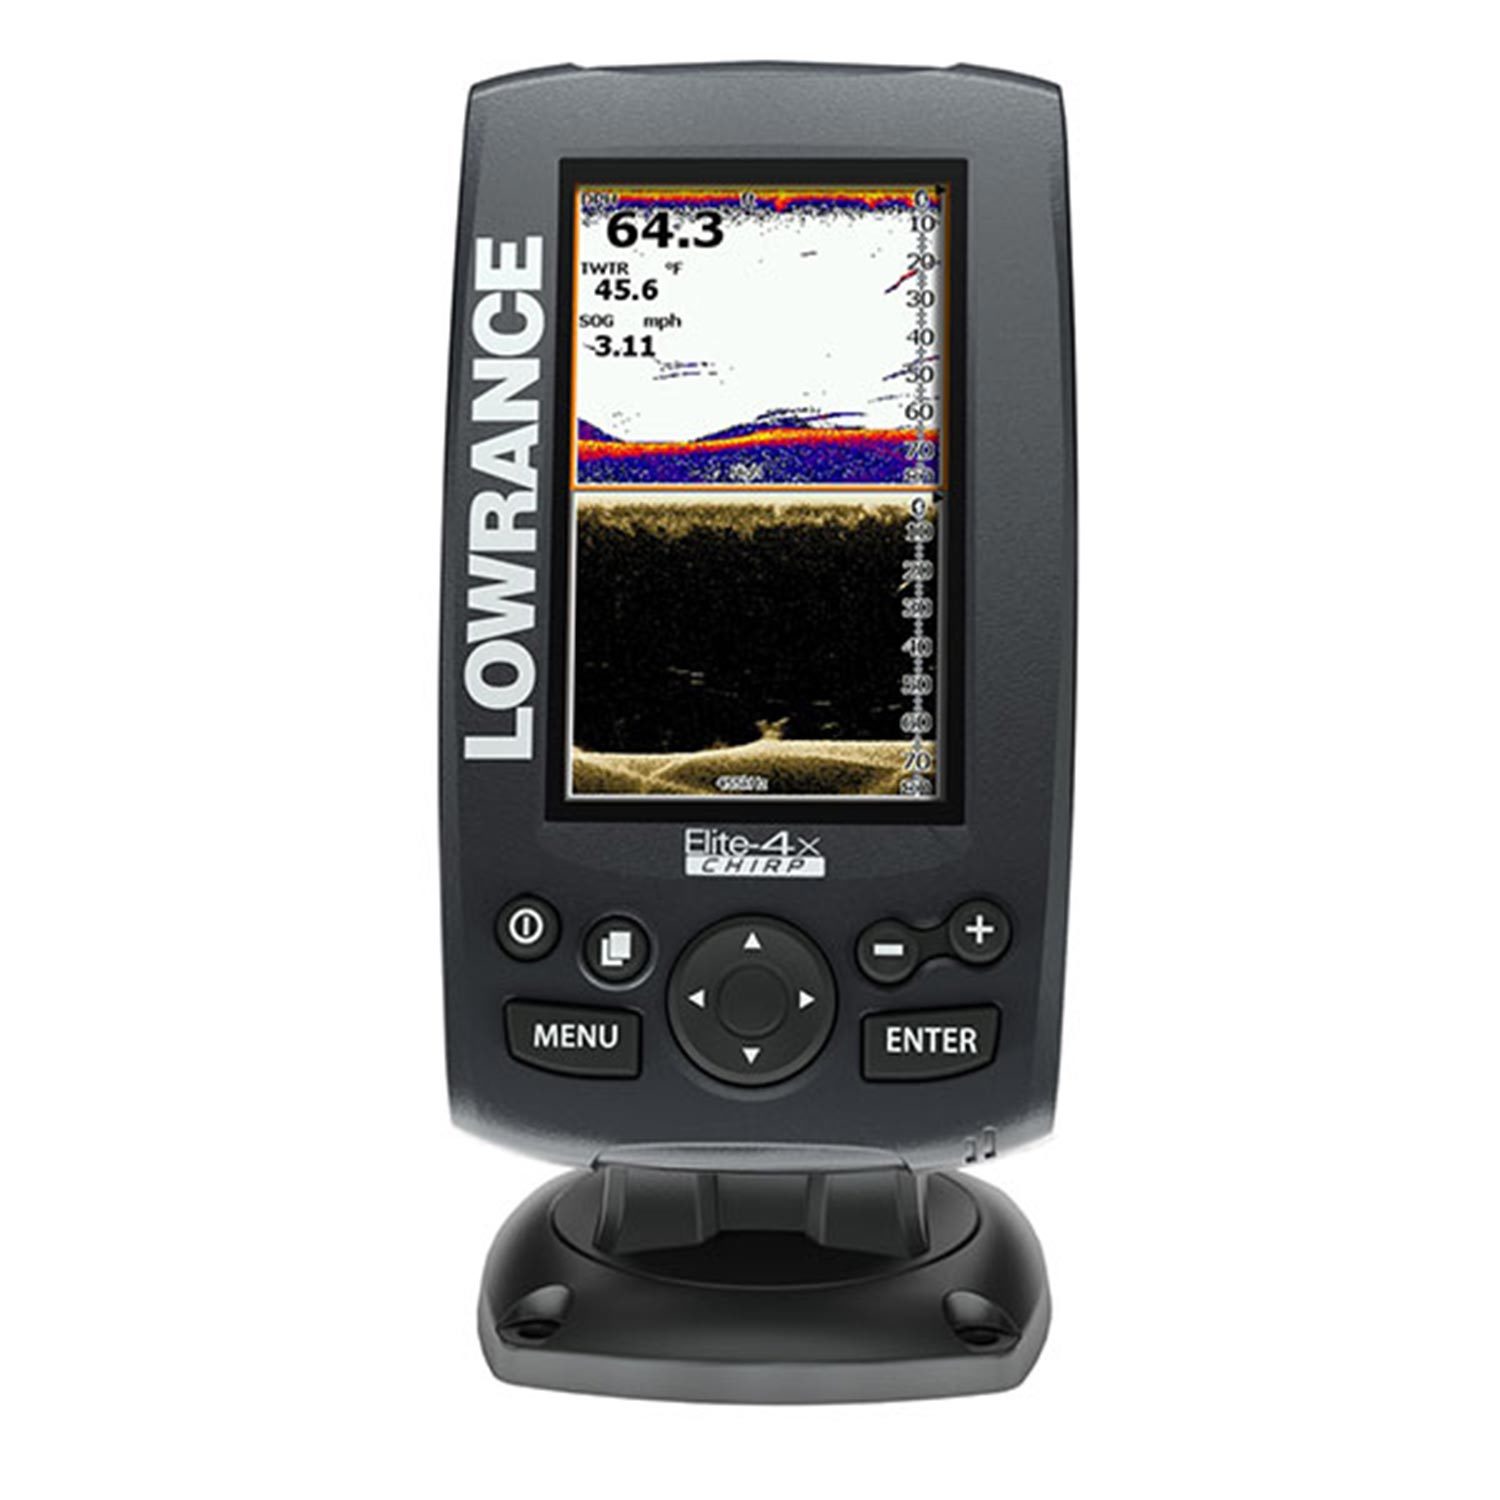 Lowrance elite - 4x chirp.. vertical lines.. interference.. help! - Marine  Electronics - Bass Fishing Forums